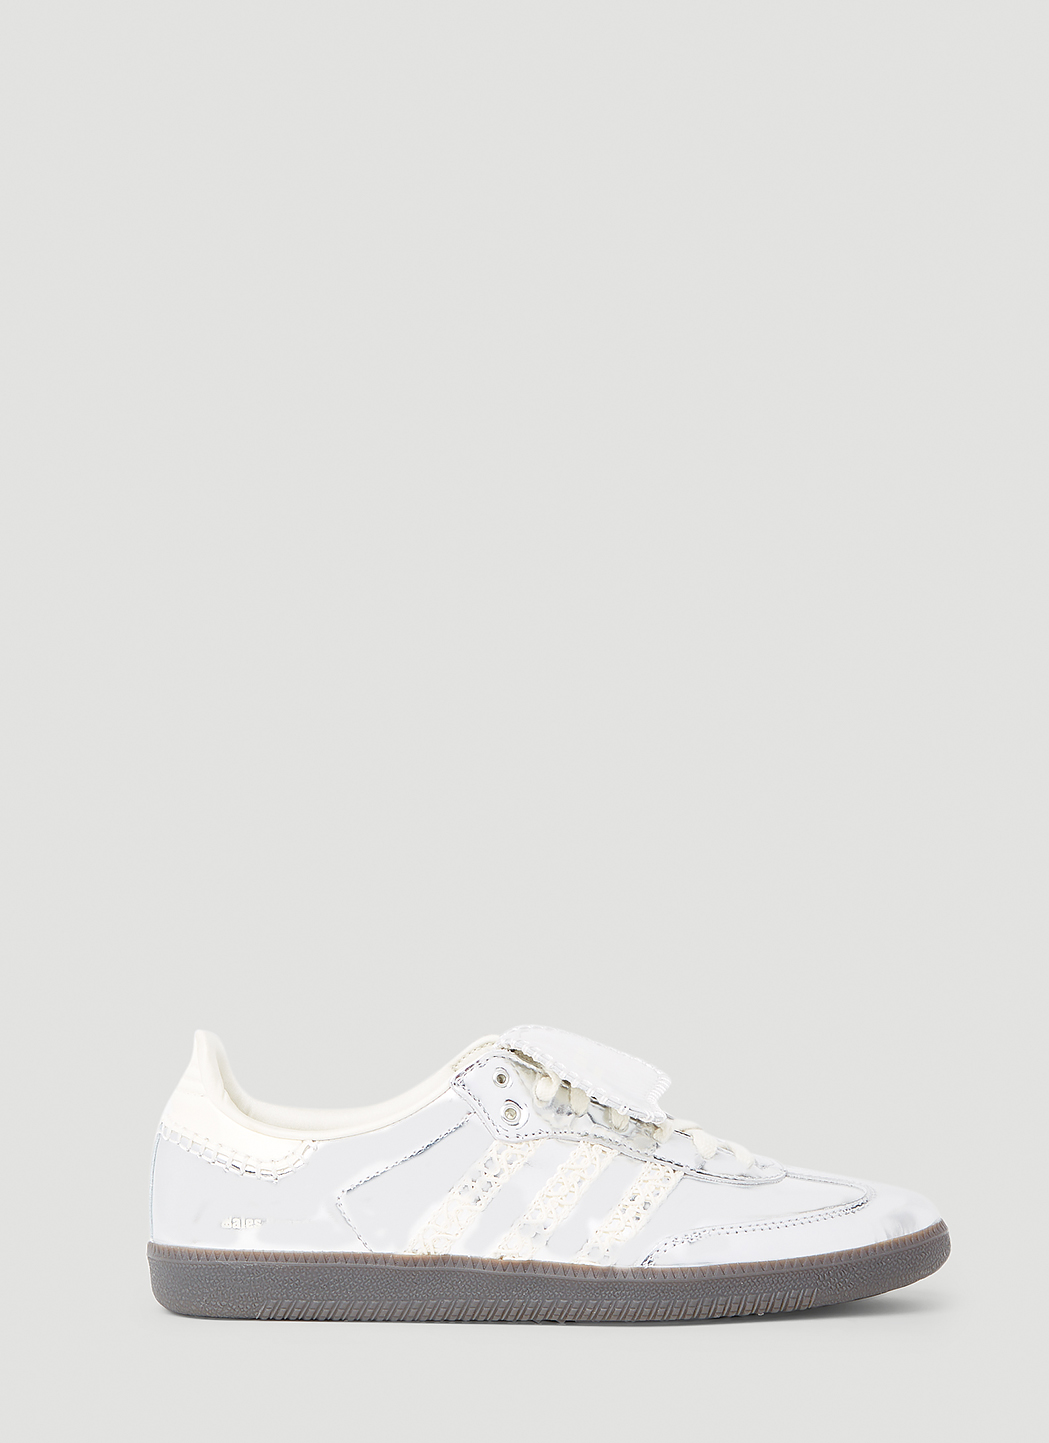 adidas by Wales Bonner Samba Sneakers in Silver | LN-CC®